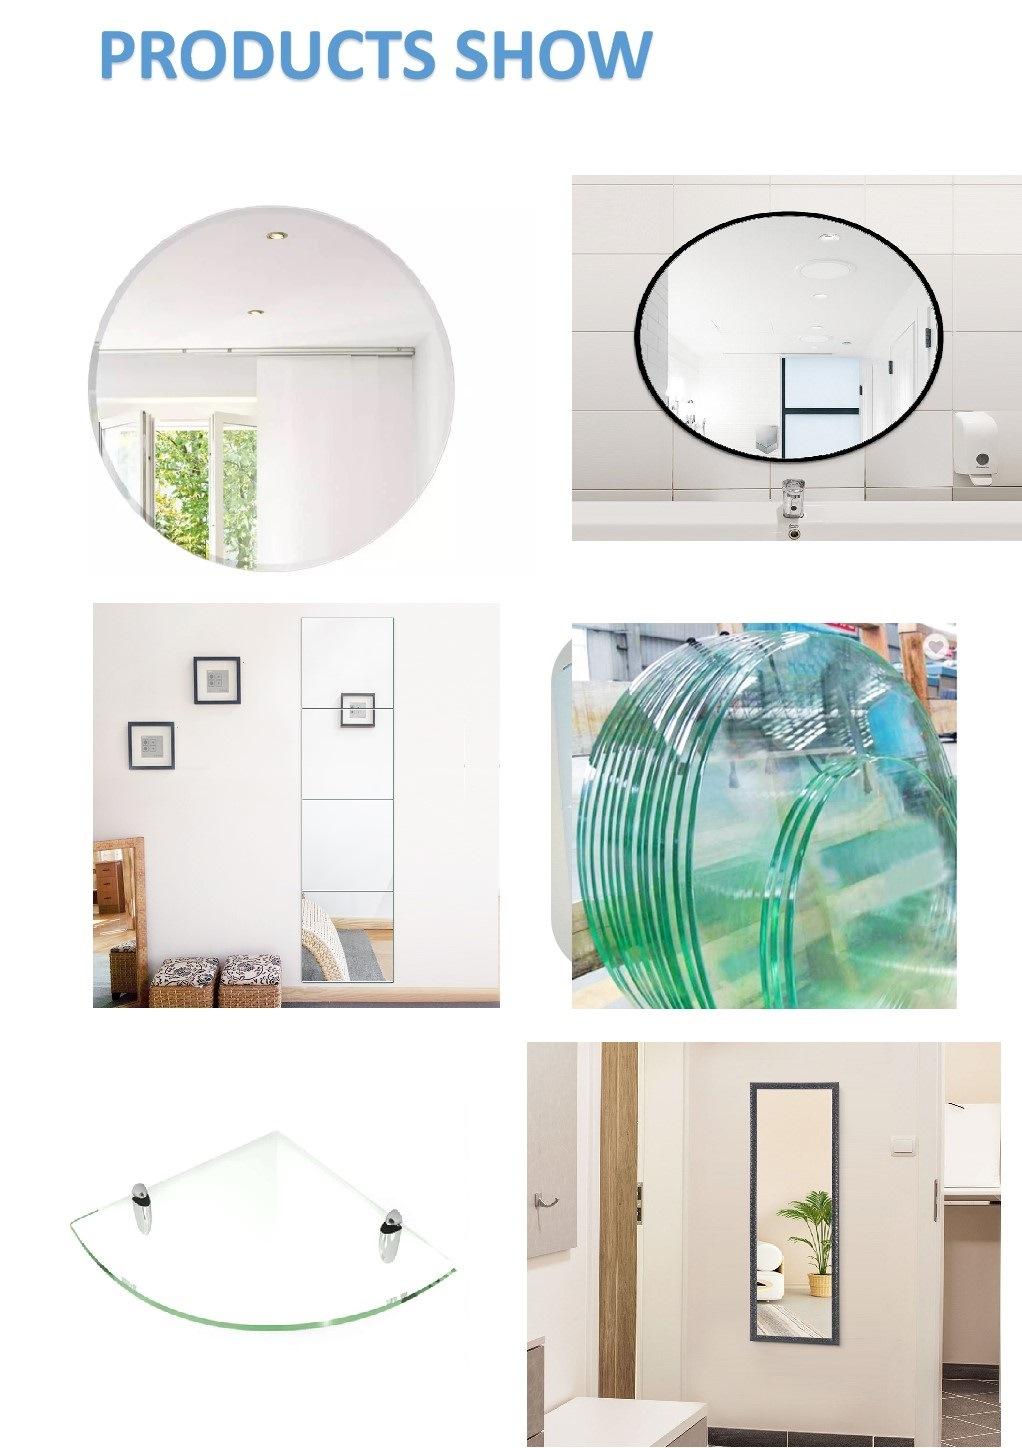 China Hot Sale Good 2mm, 3mm, 4mm, 5mm, 6mm Dressing Room Mirror/Bath Room Mirror From China Good Mirror Supplier CE, SGS Certificate